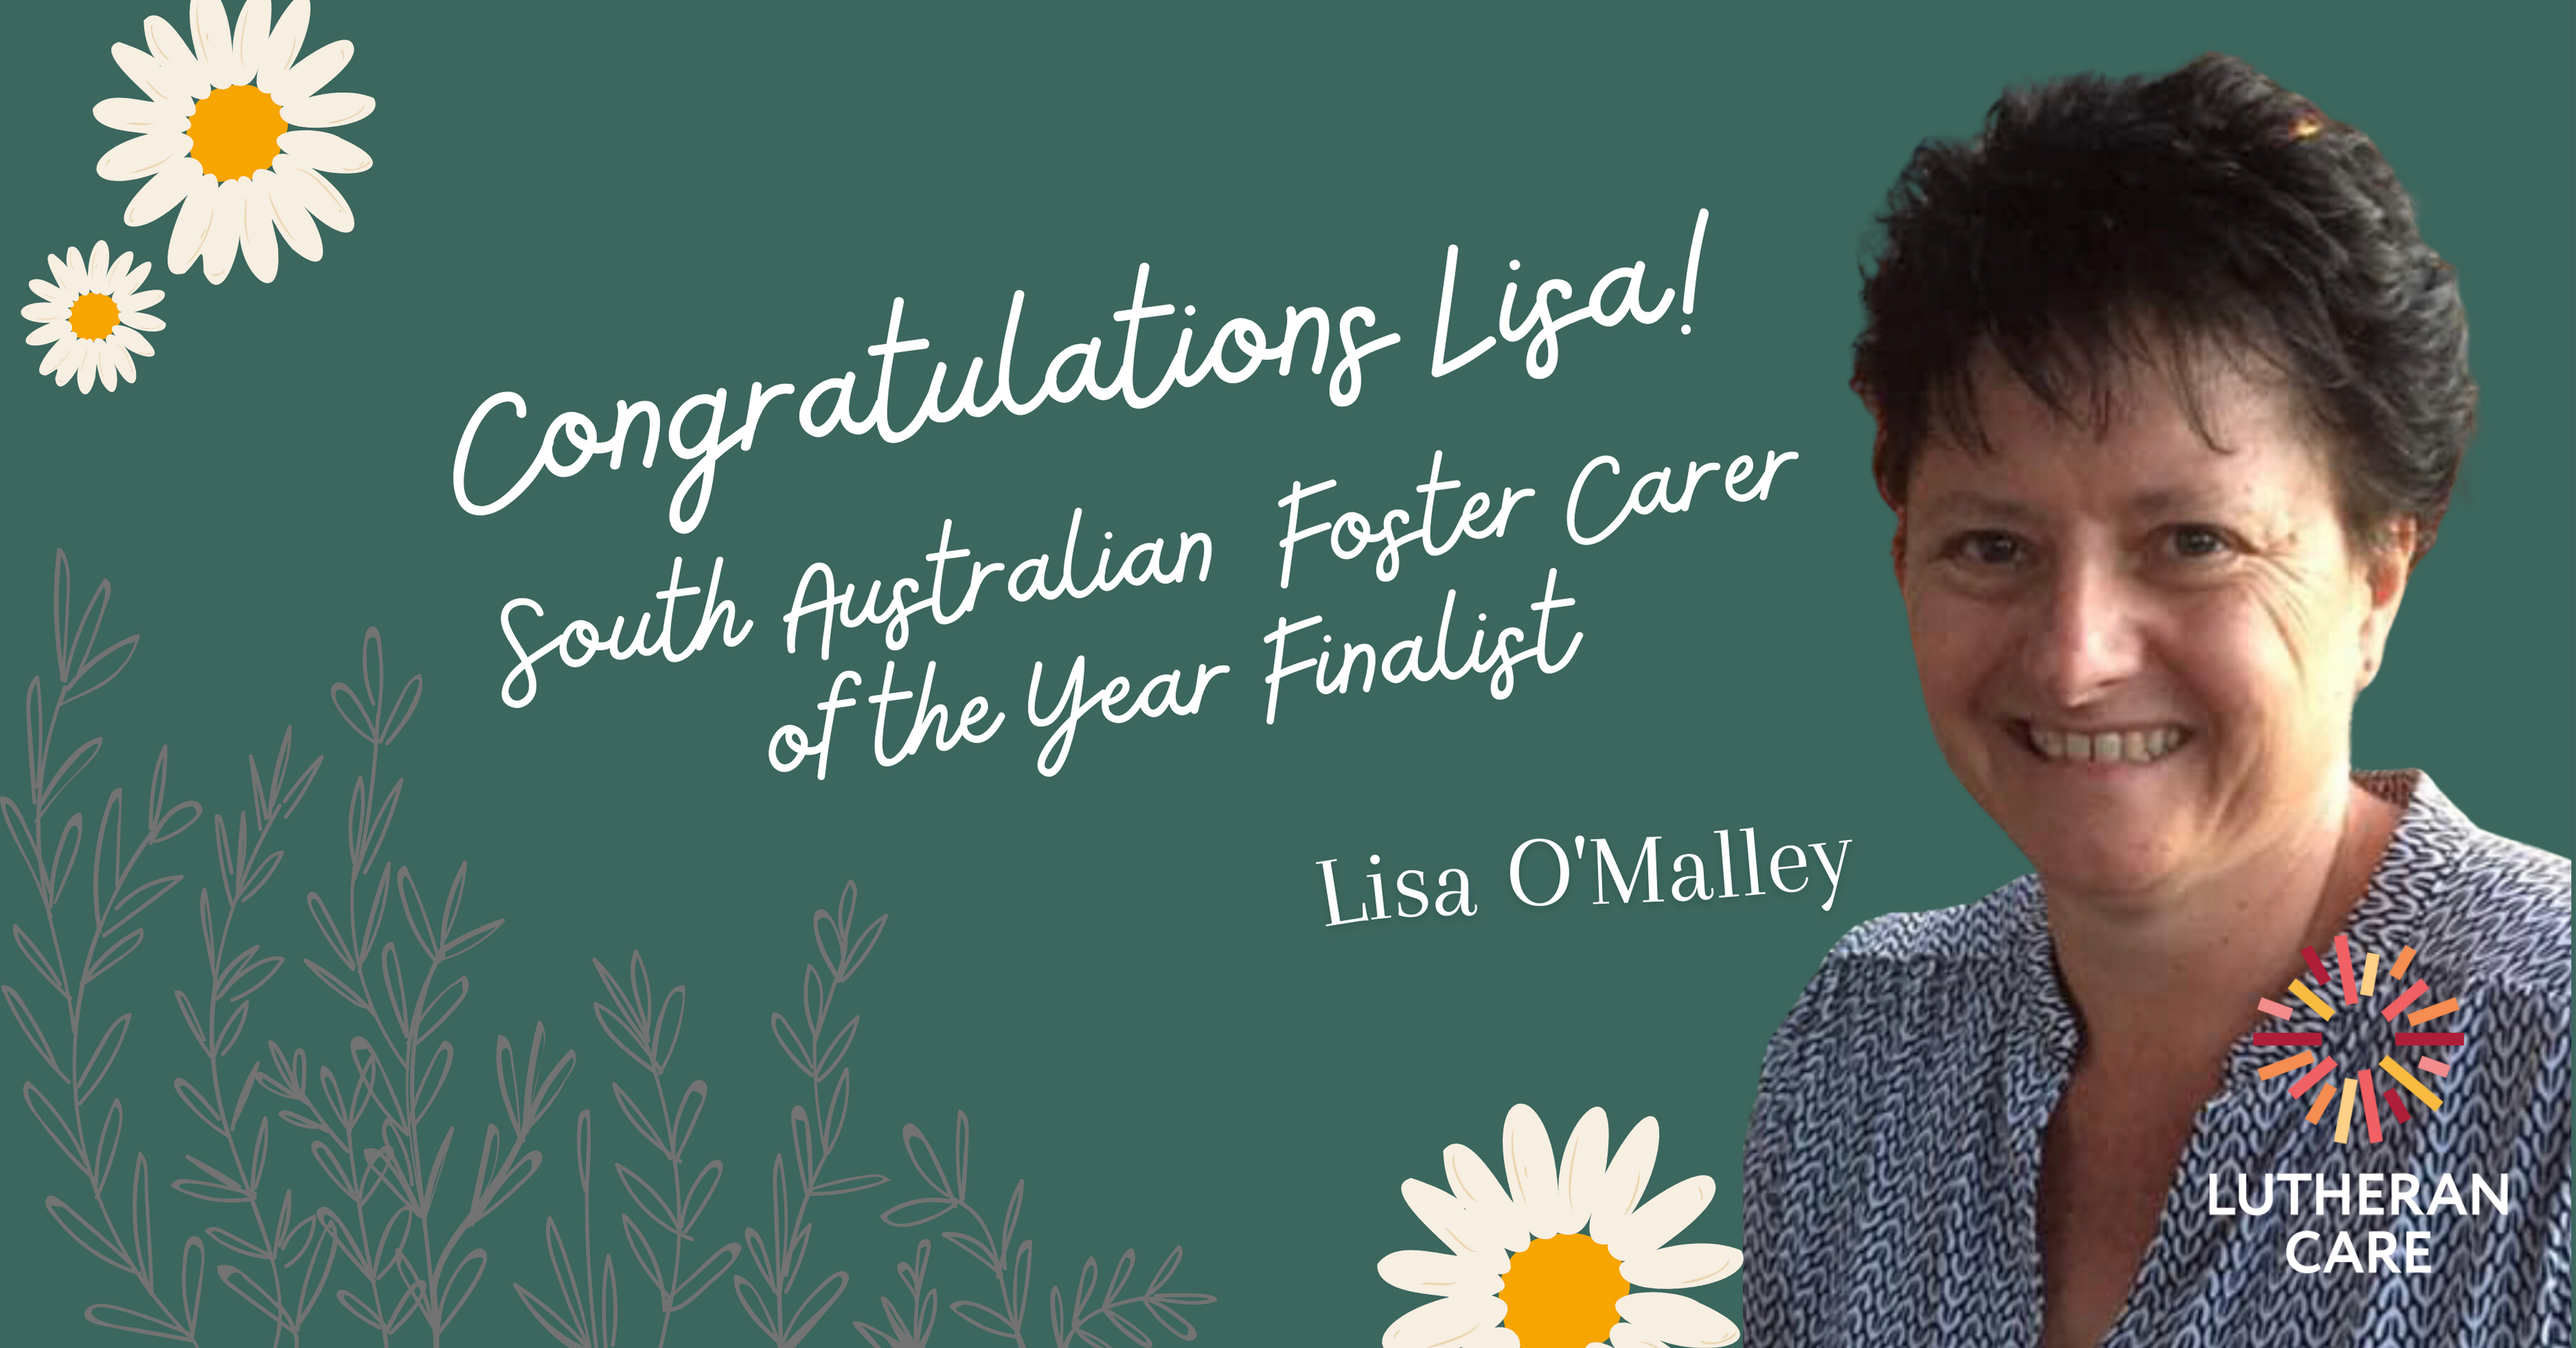 Image of Lisa with text that says Congratulations Lisa! South Australia Foster Carer of the Year Finalist. The Lutheran Care logo appears in the bottom right hand corner.